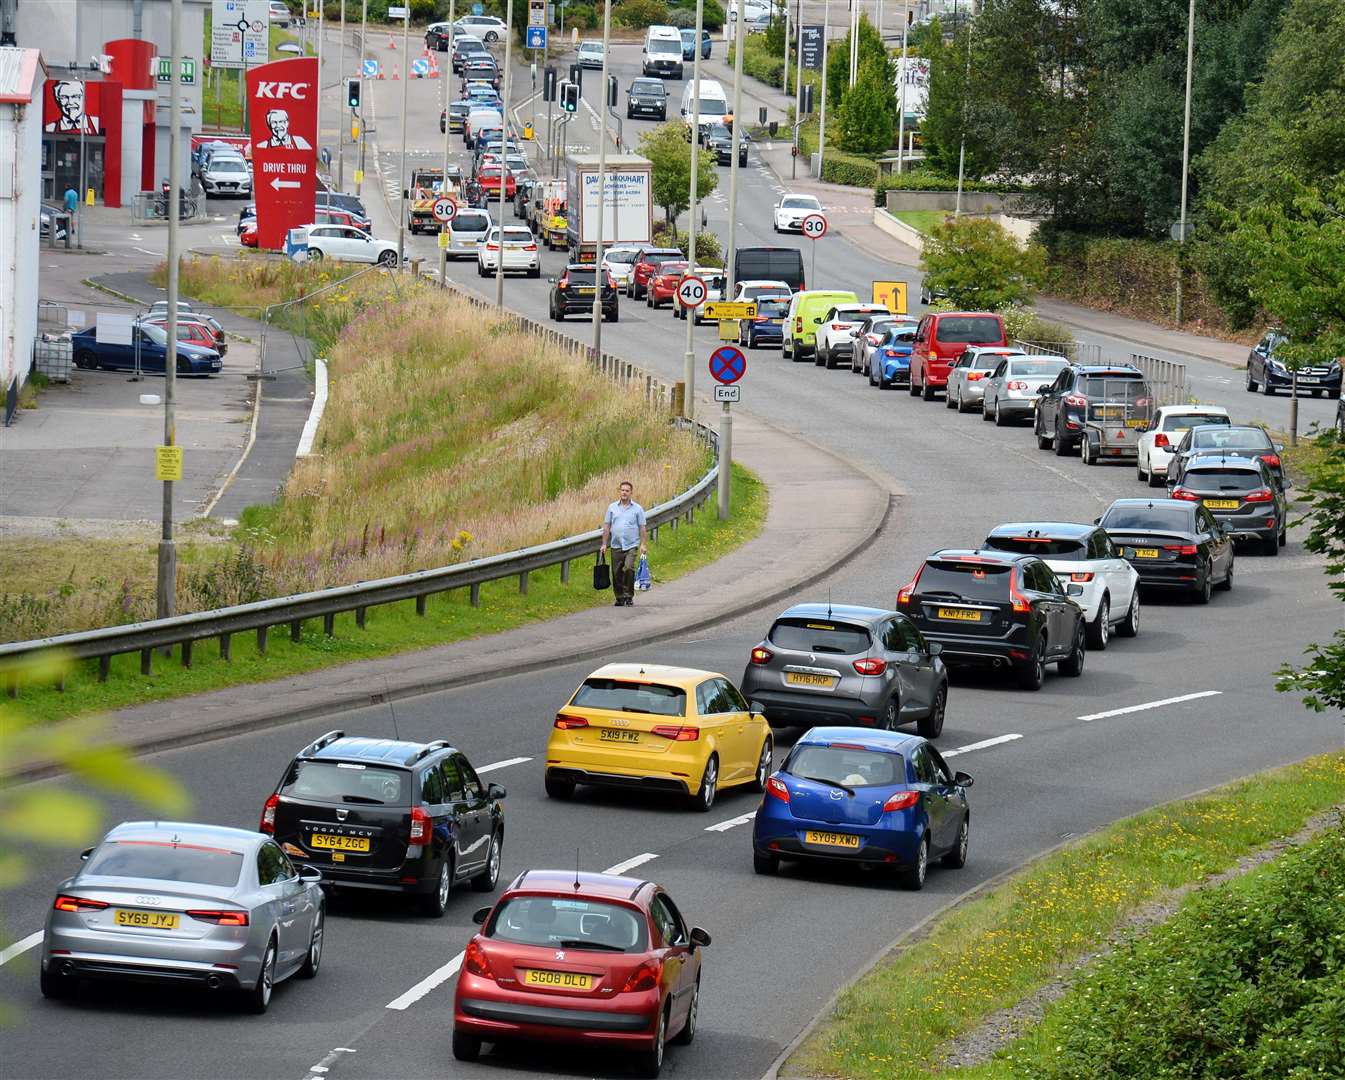 The measures had been blamed for causing major tailbacks.